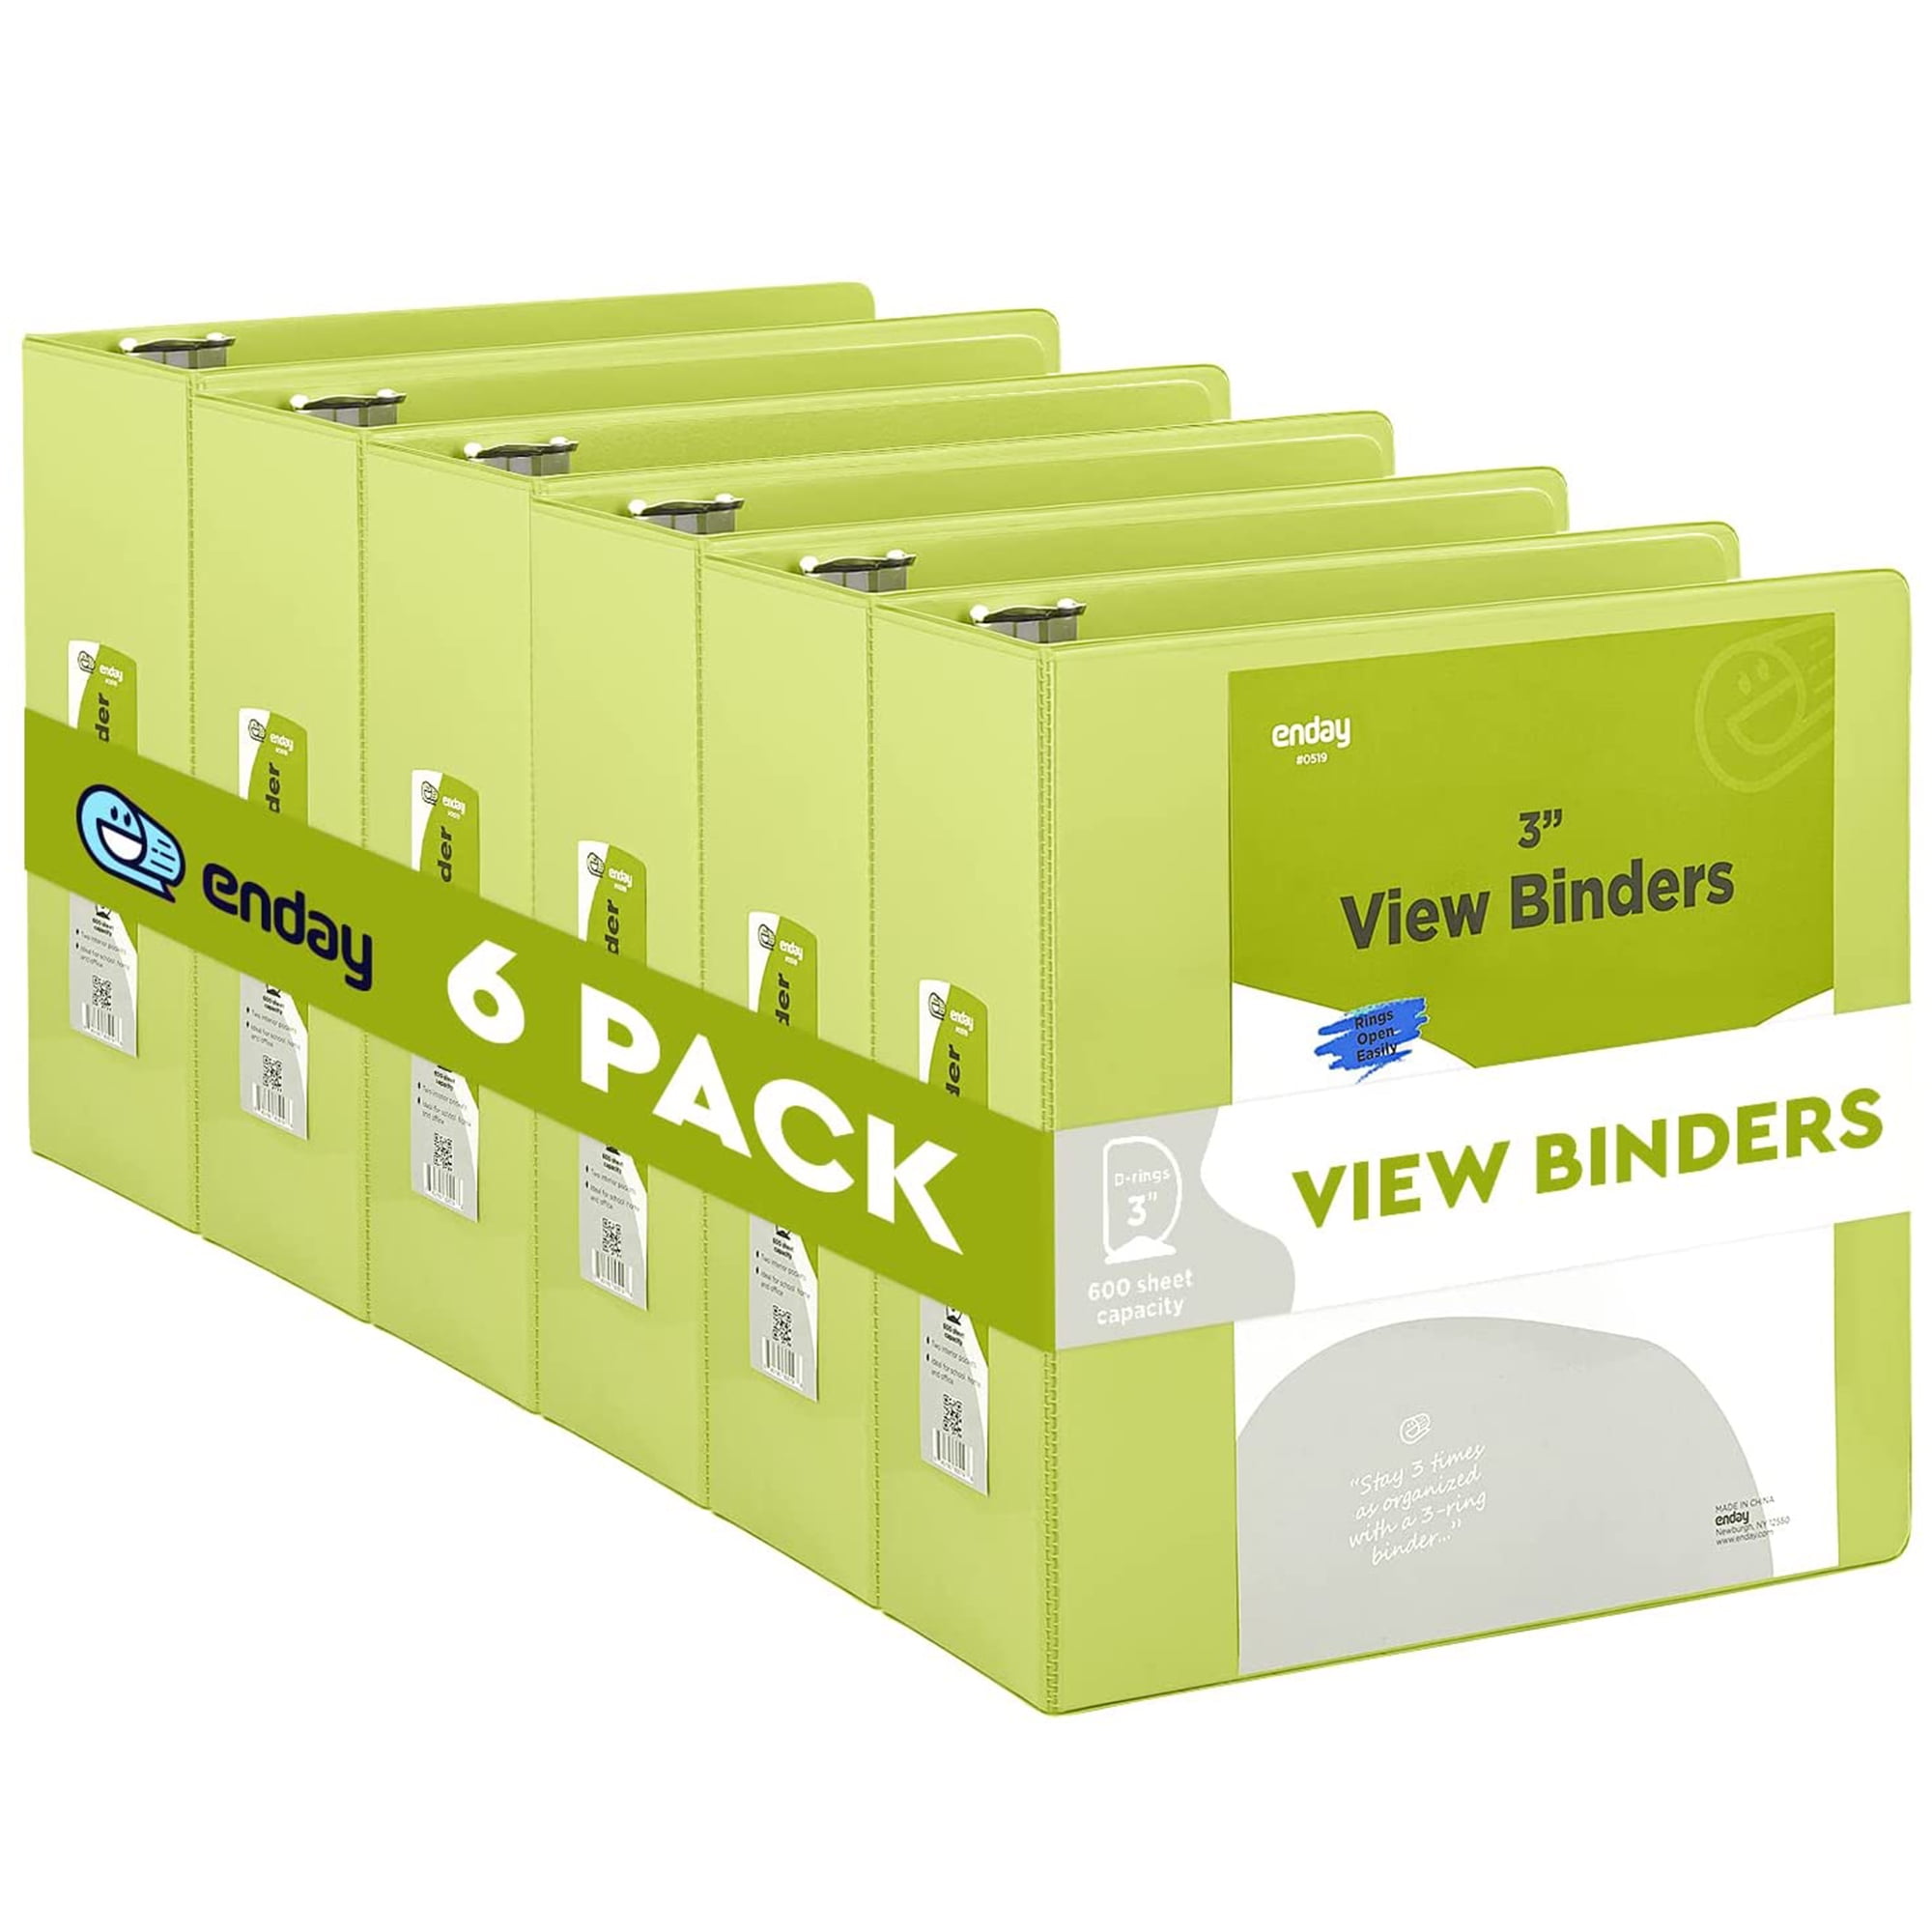 Enday 1/2 inch Binder 3 Ring Binders with Pockets for Home, Office, School Supplies Organization, Red 6 PC, Size: 0.5